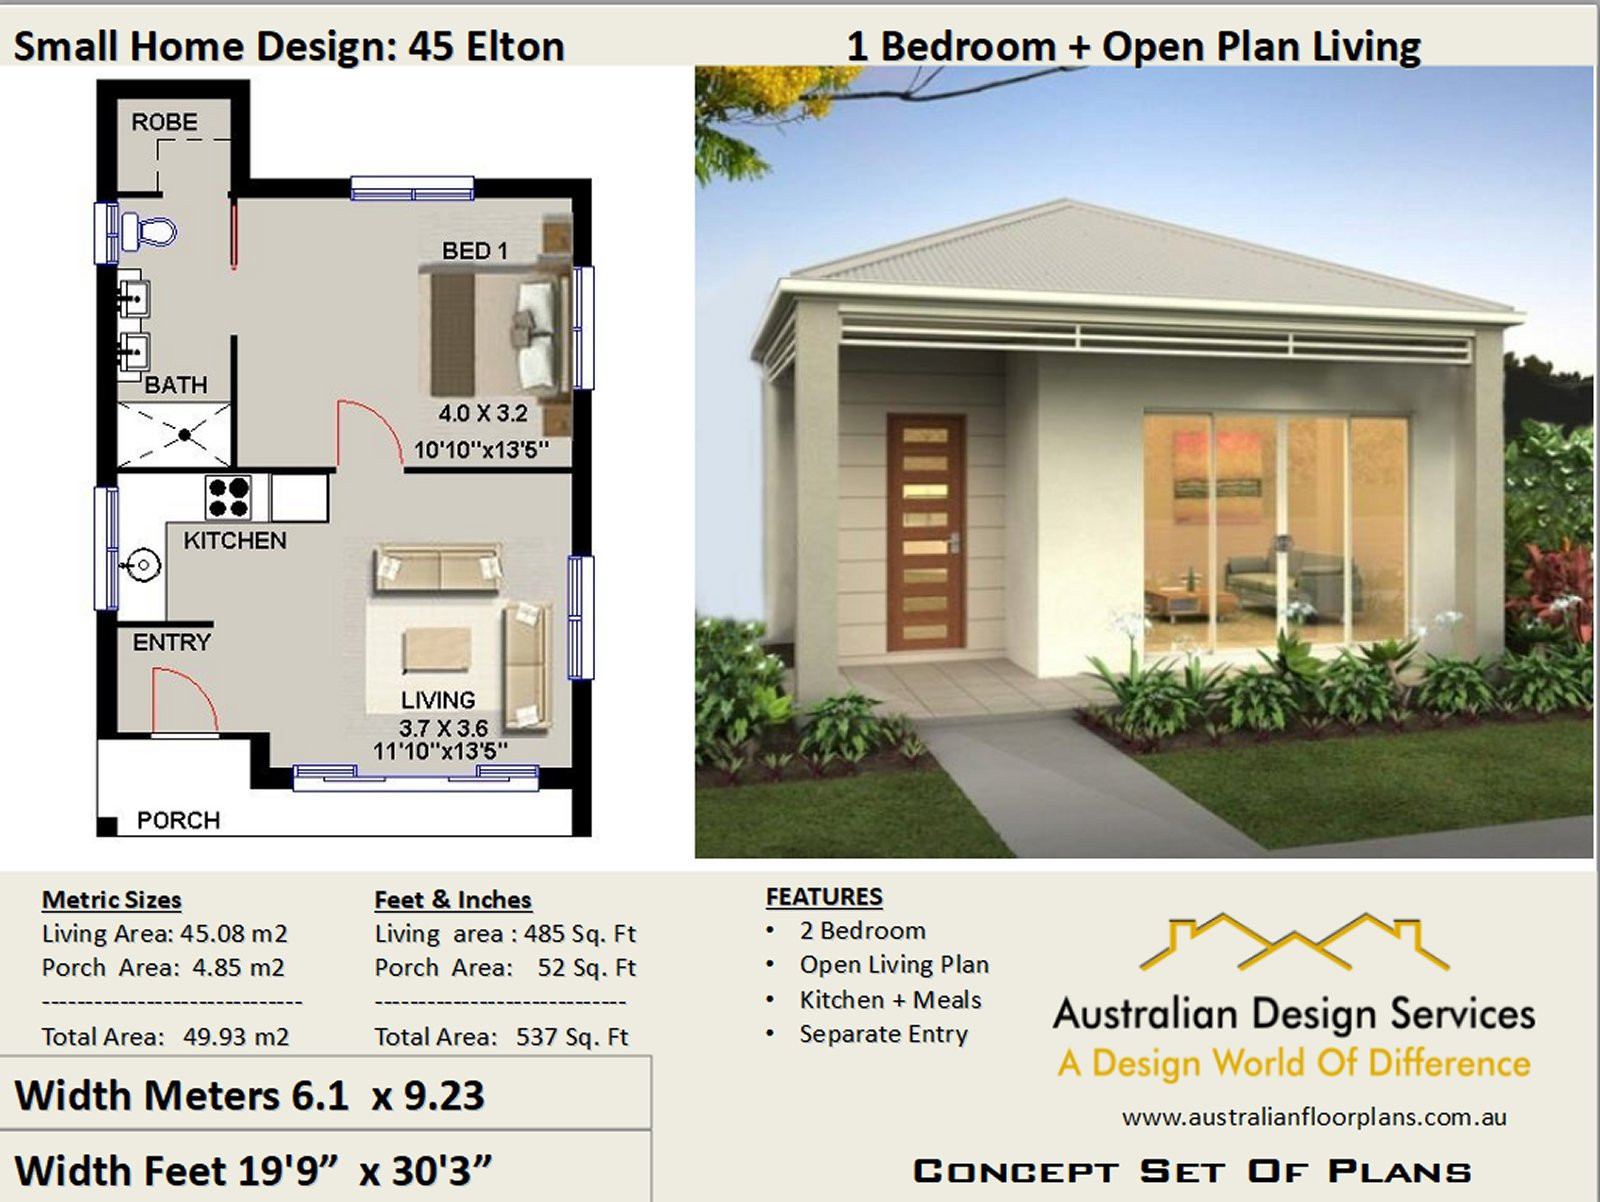 Small 1 Bedroom House
 Small House Plan 45 Elton 537 Sq Foot 45 93 m2 1 Bedroom